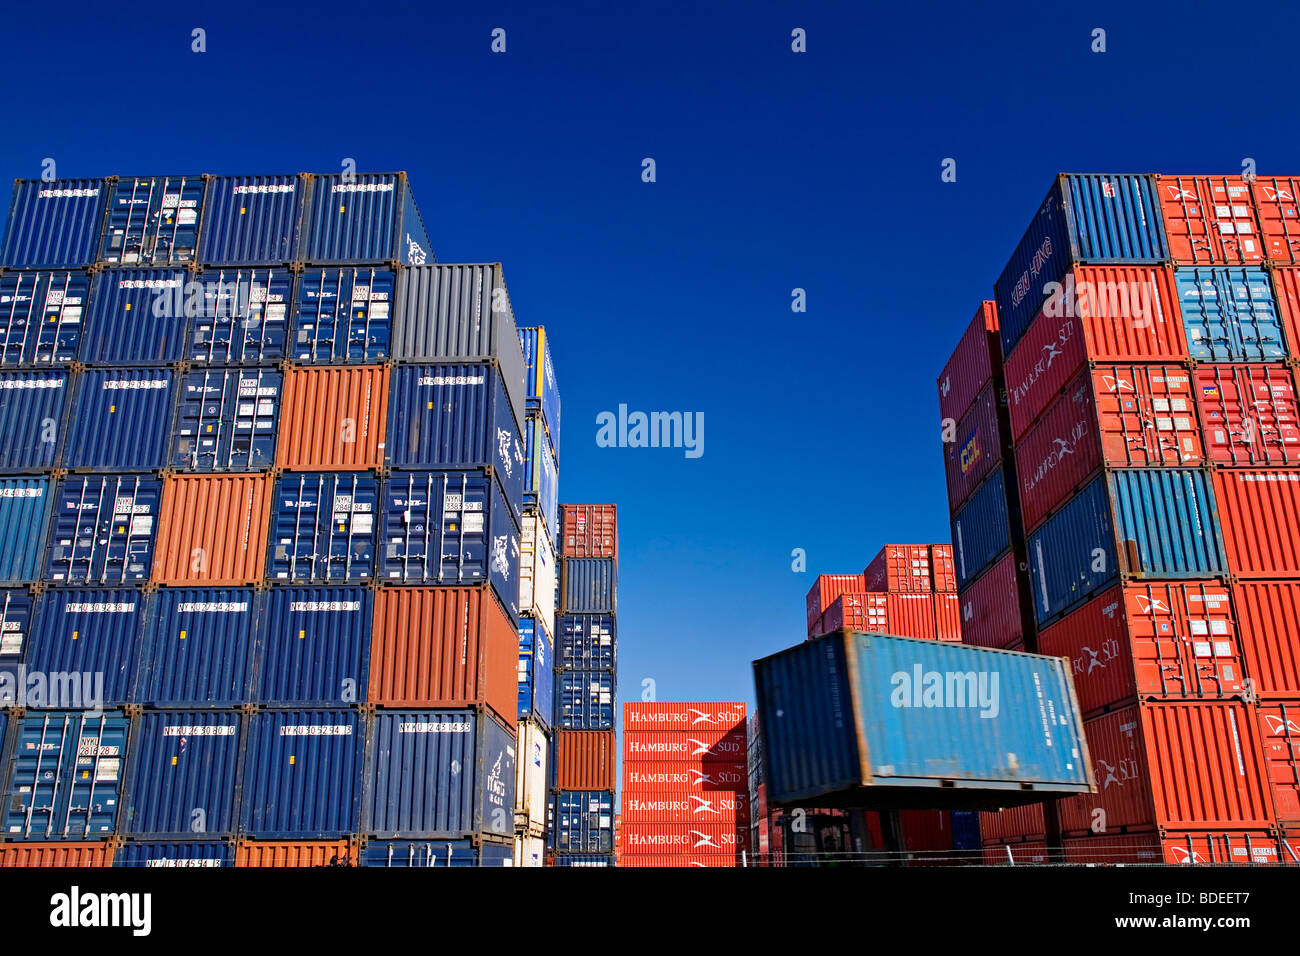 Shipping Industry / Shipping containers stacked at a port container terminal.The 'Port of Melbourne' Victoria Australia. Stock Photo